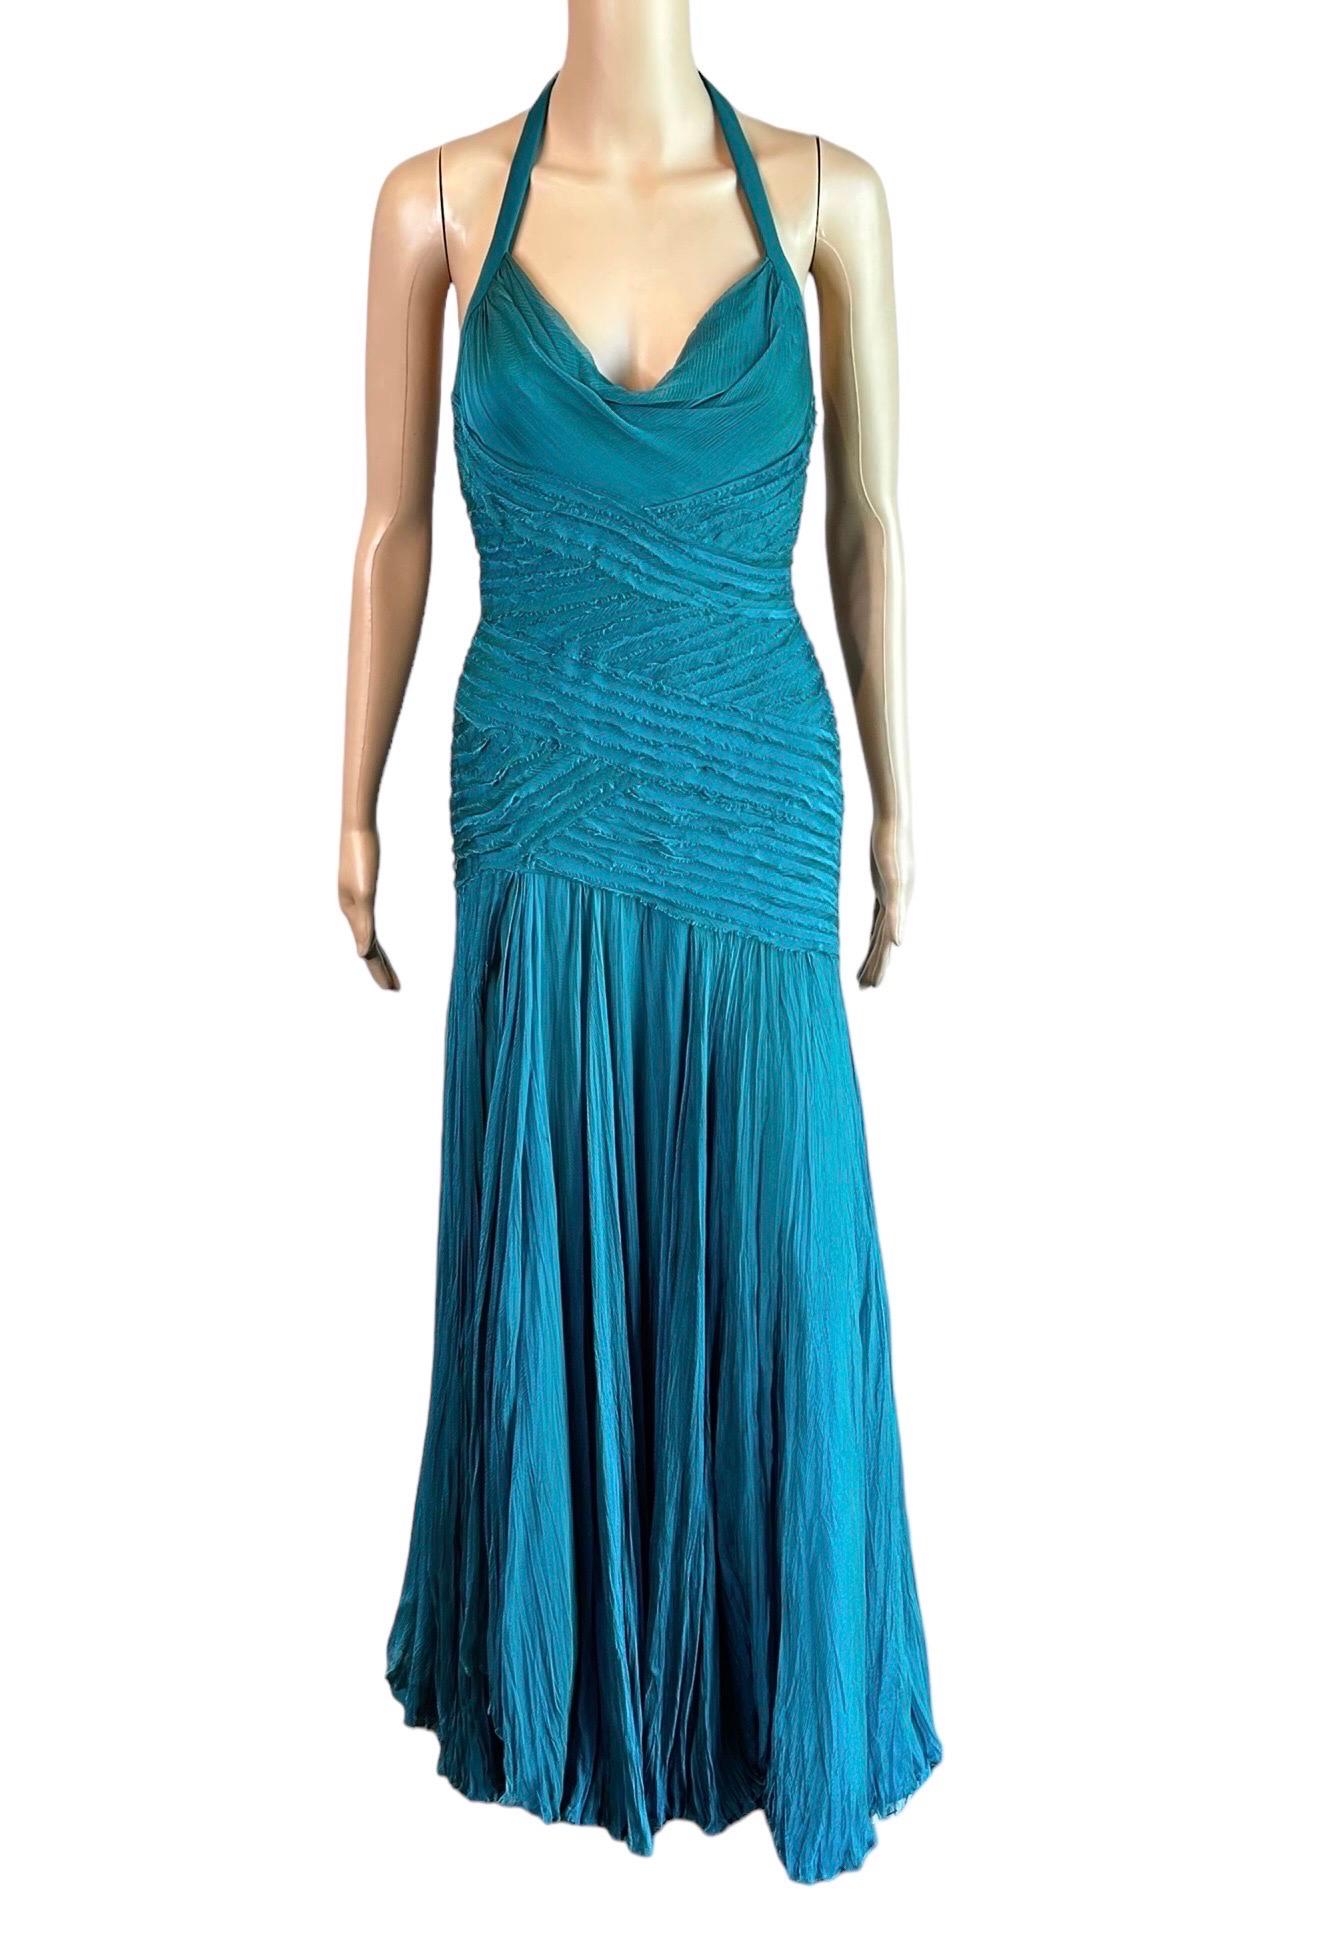 Versace F/W 2005 Runway Campaign Halter High Slit Slip Evening Dress Gown  For Sale 2